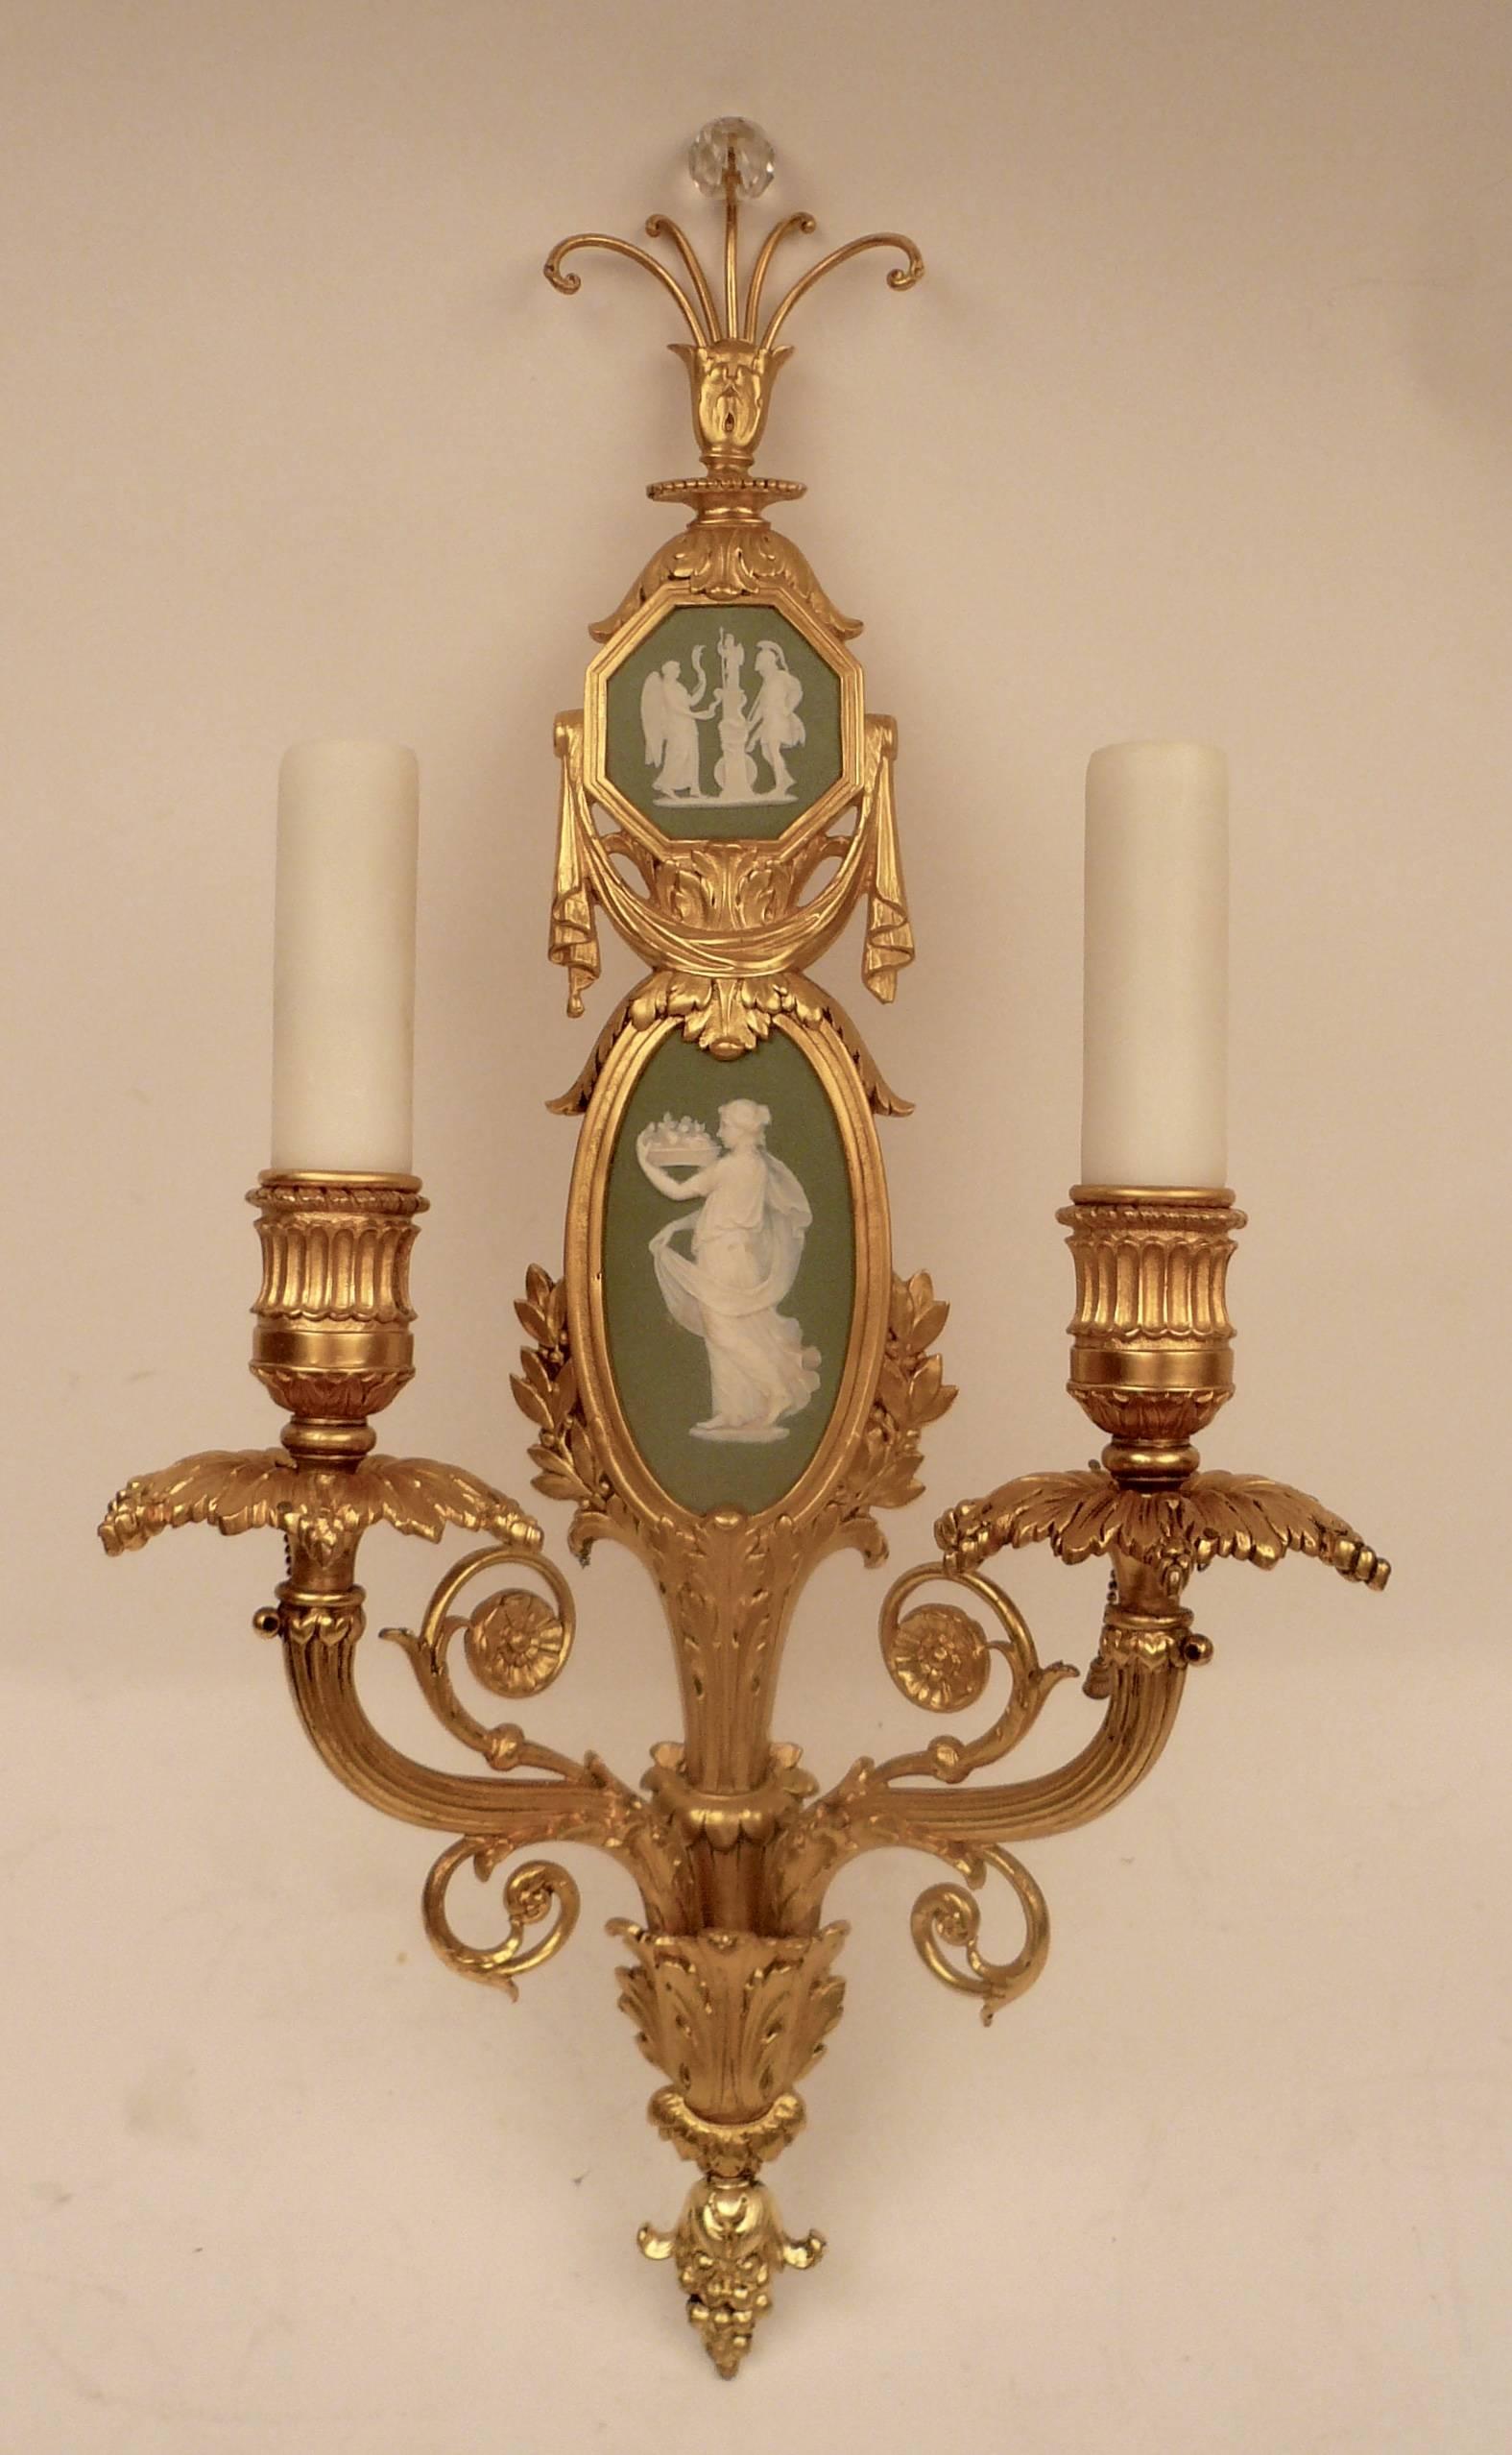 This impressive pair of two-light sconces feature wedgwood jasperware plaques mounted in gilt bronze.